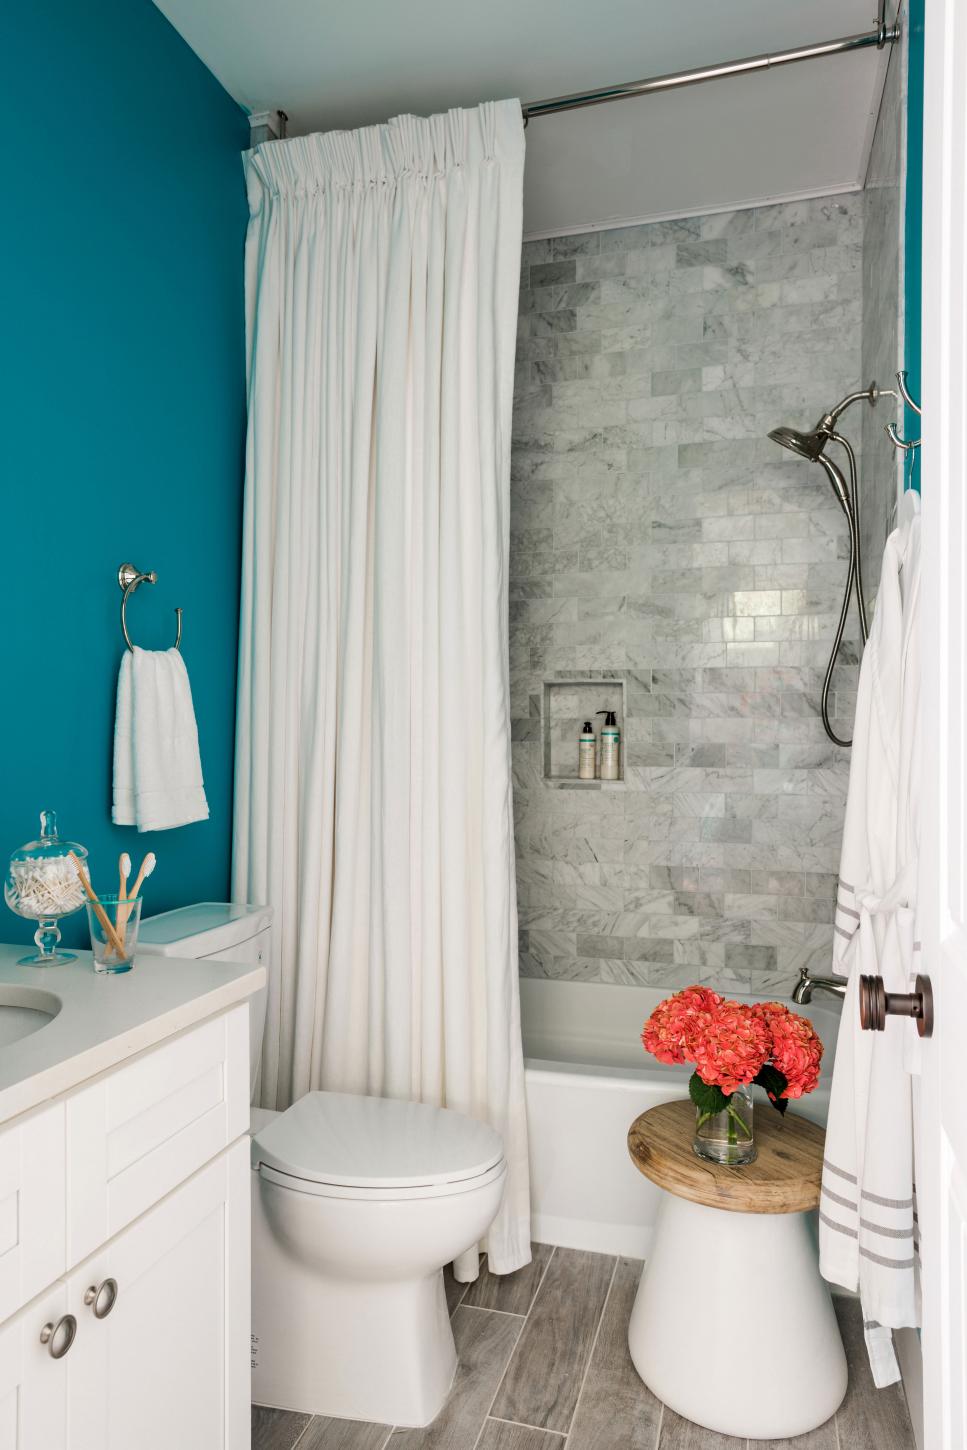 What are some bathroom design ideas from HGTV?